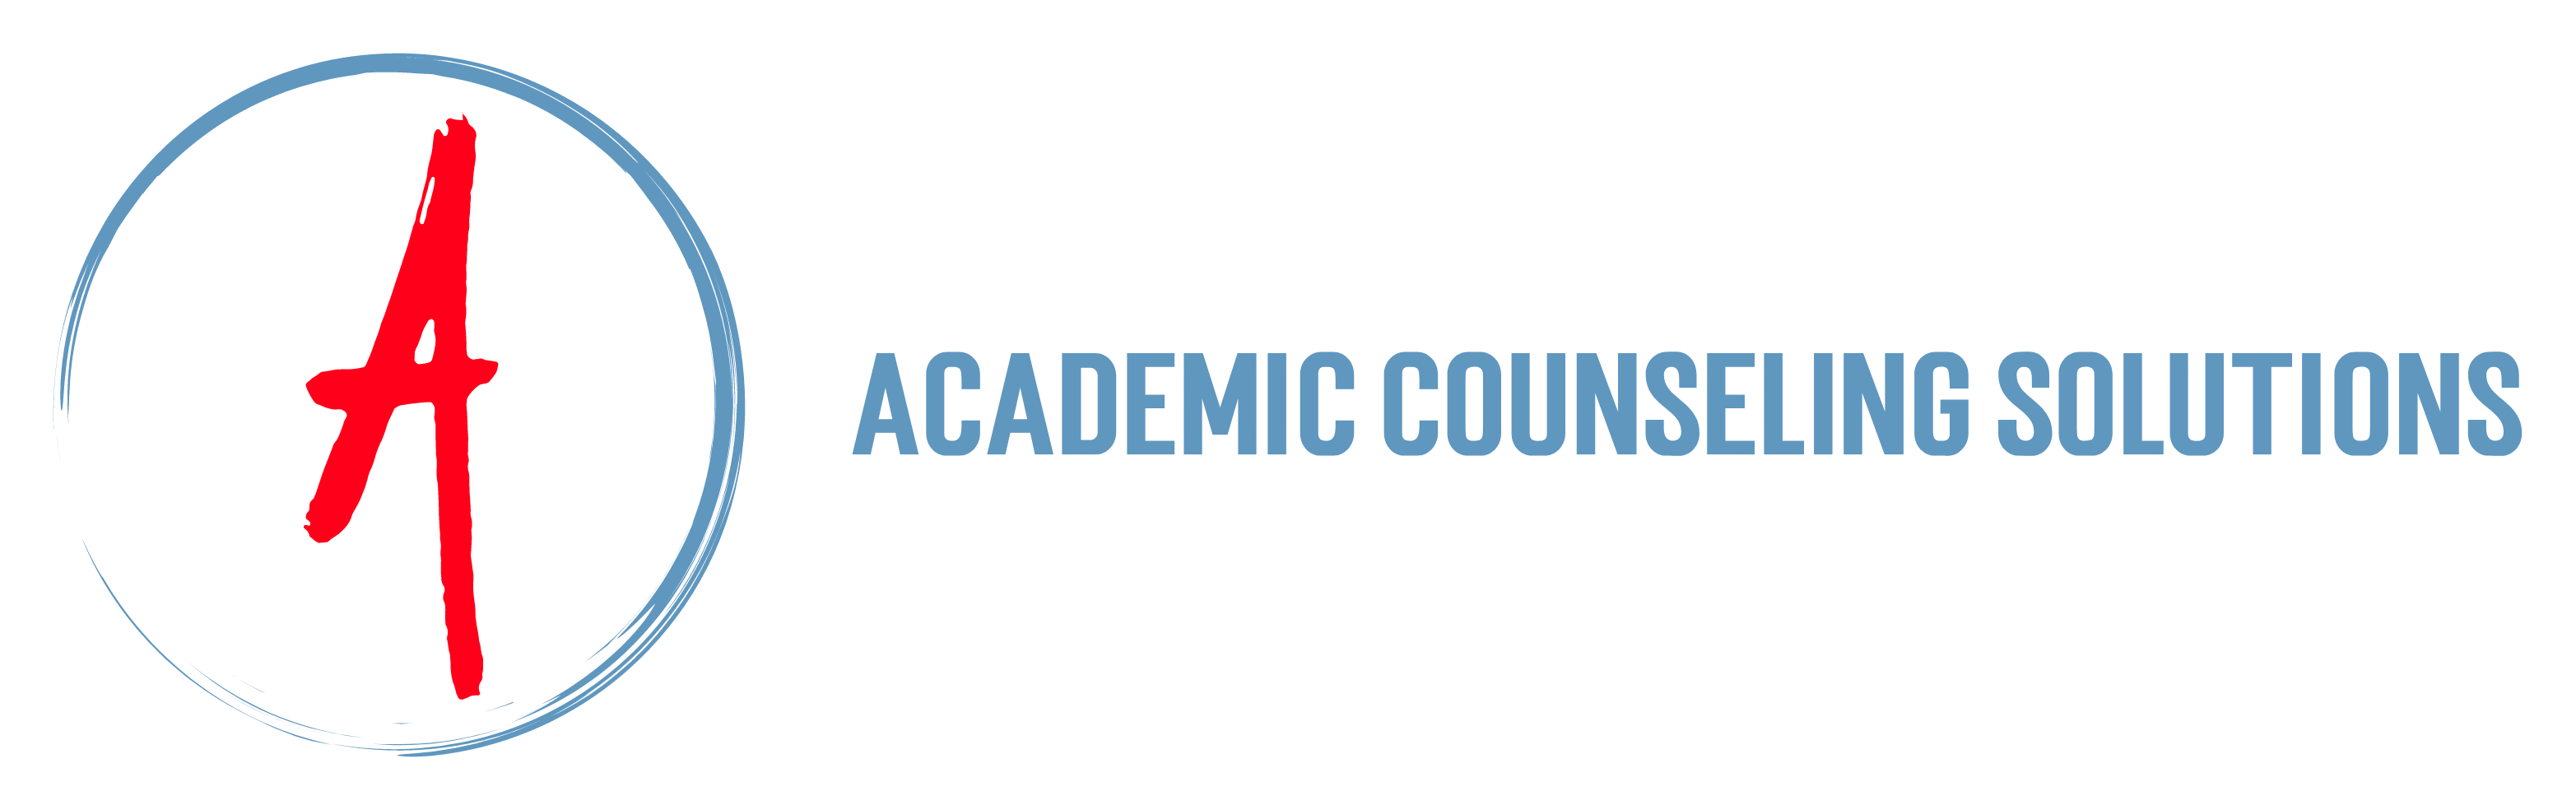 Academic Counseling Solutions